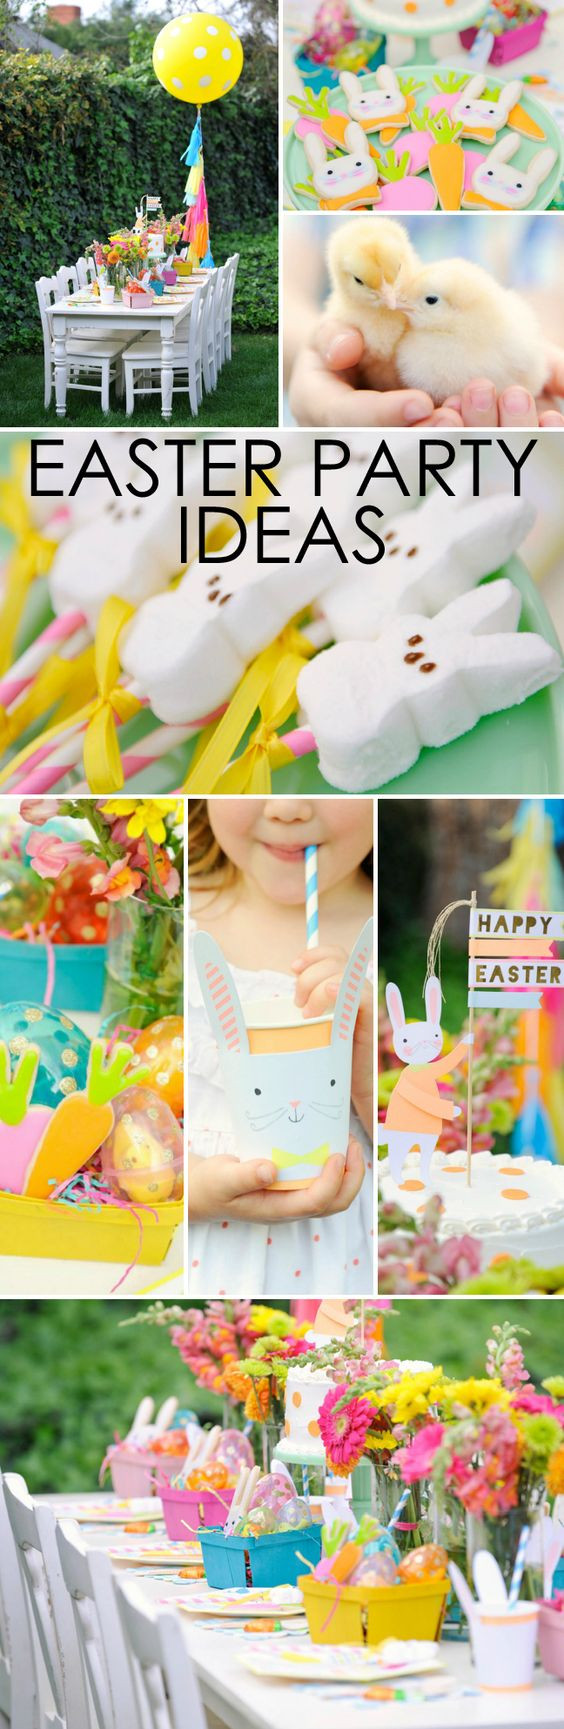 Easter Entertaining &amp; Party Ideas
 Plan a Bunny tastic Kids Easter Party